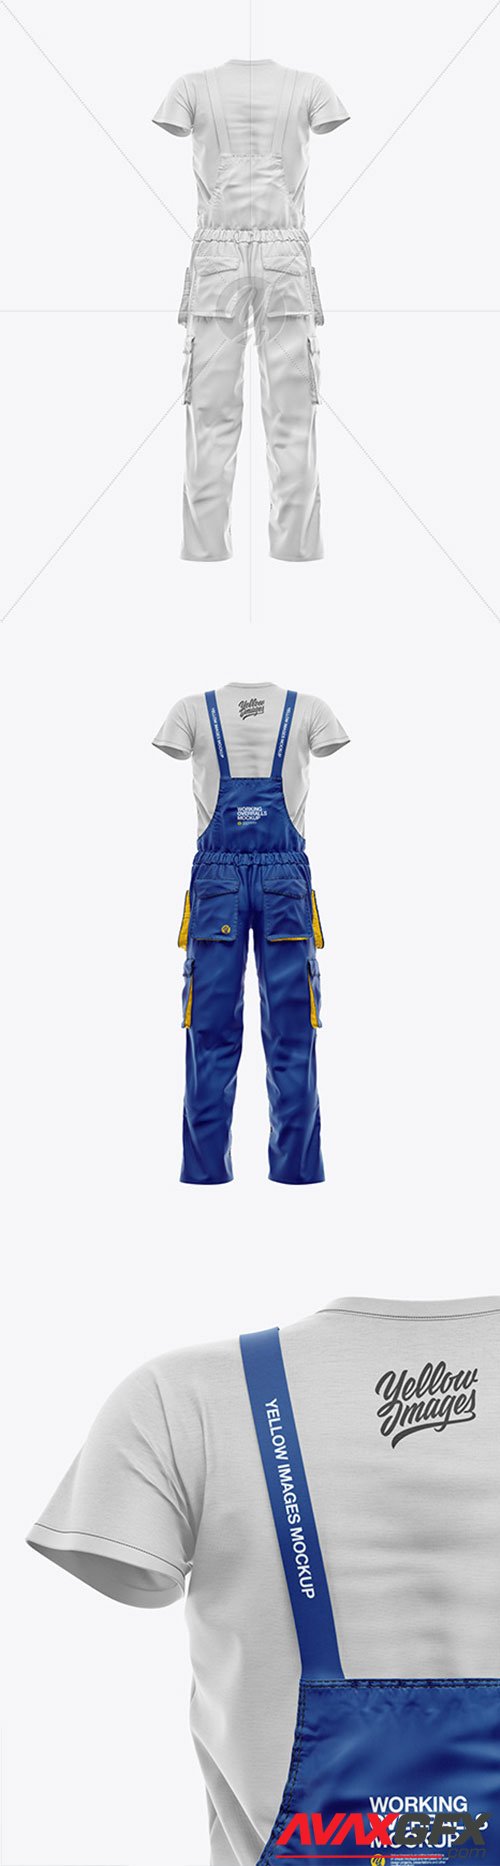 Download Melange Working Overalls Mockup 65360 Avaxgfx All Downloads That You Need In One Place Graphic From Nitroflare Rapidgator